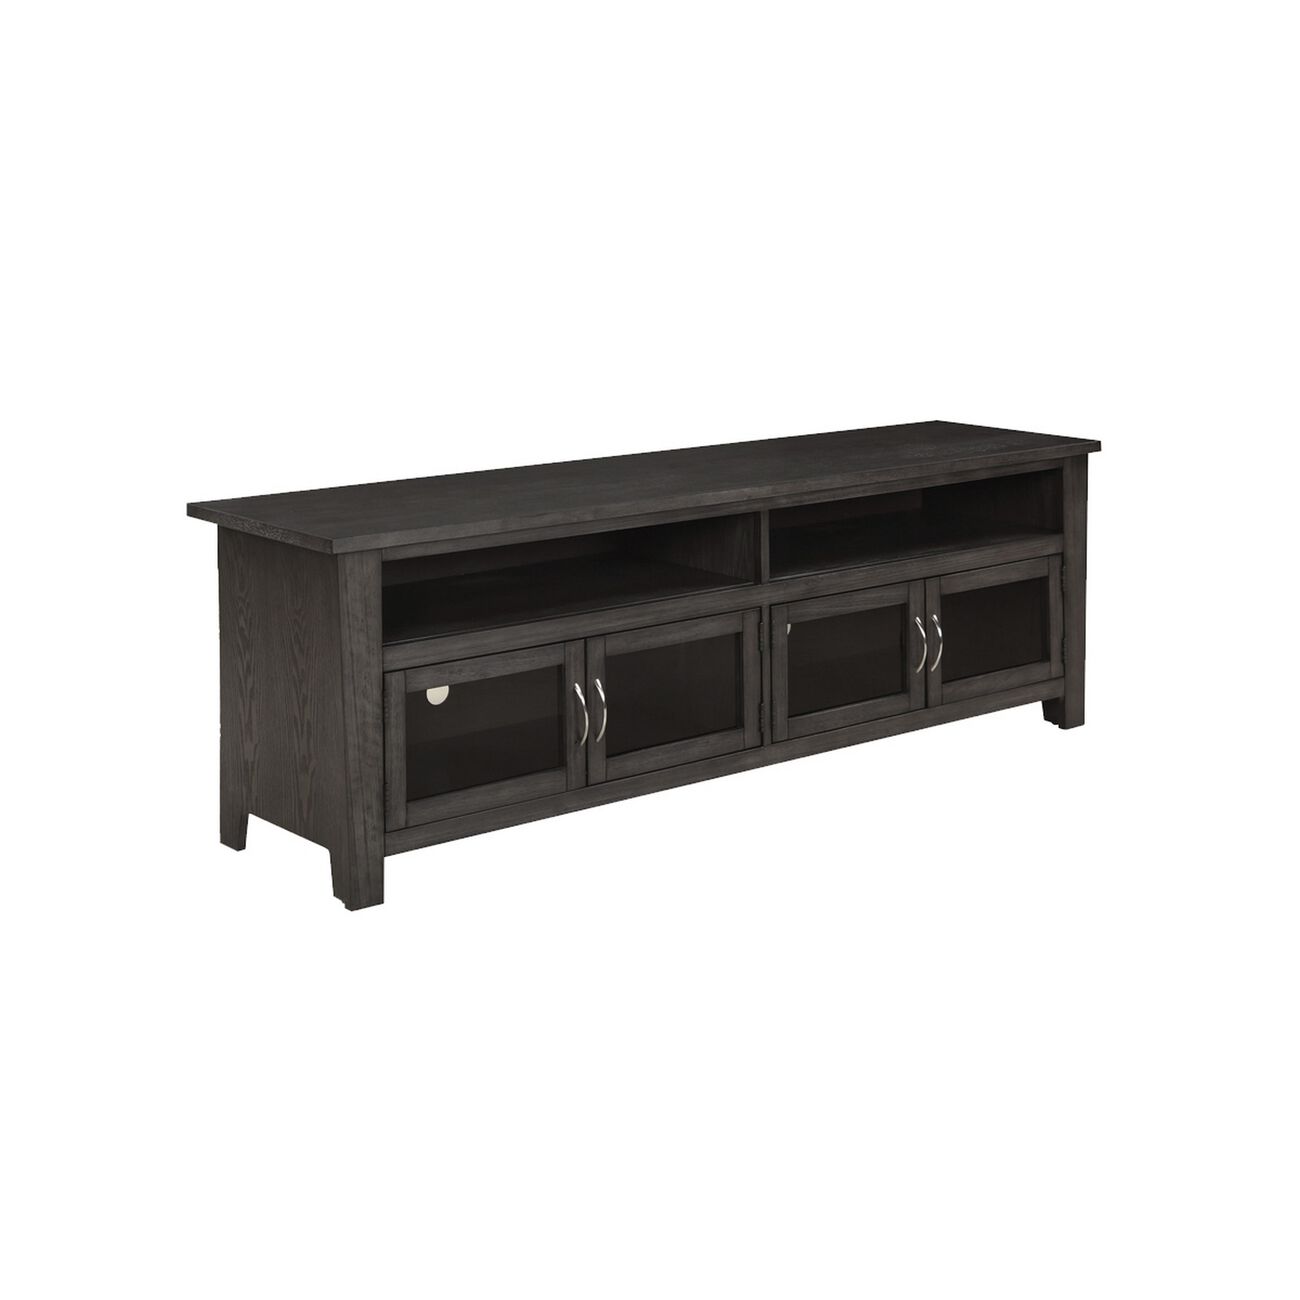 72 Inch Wooden TV Console with 2 Cabinets and 2 Shelves, Dark Gray